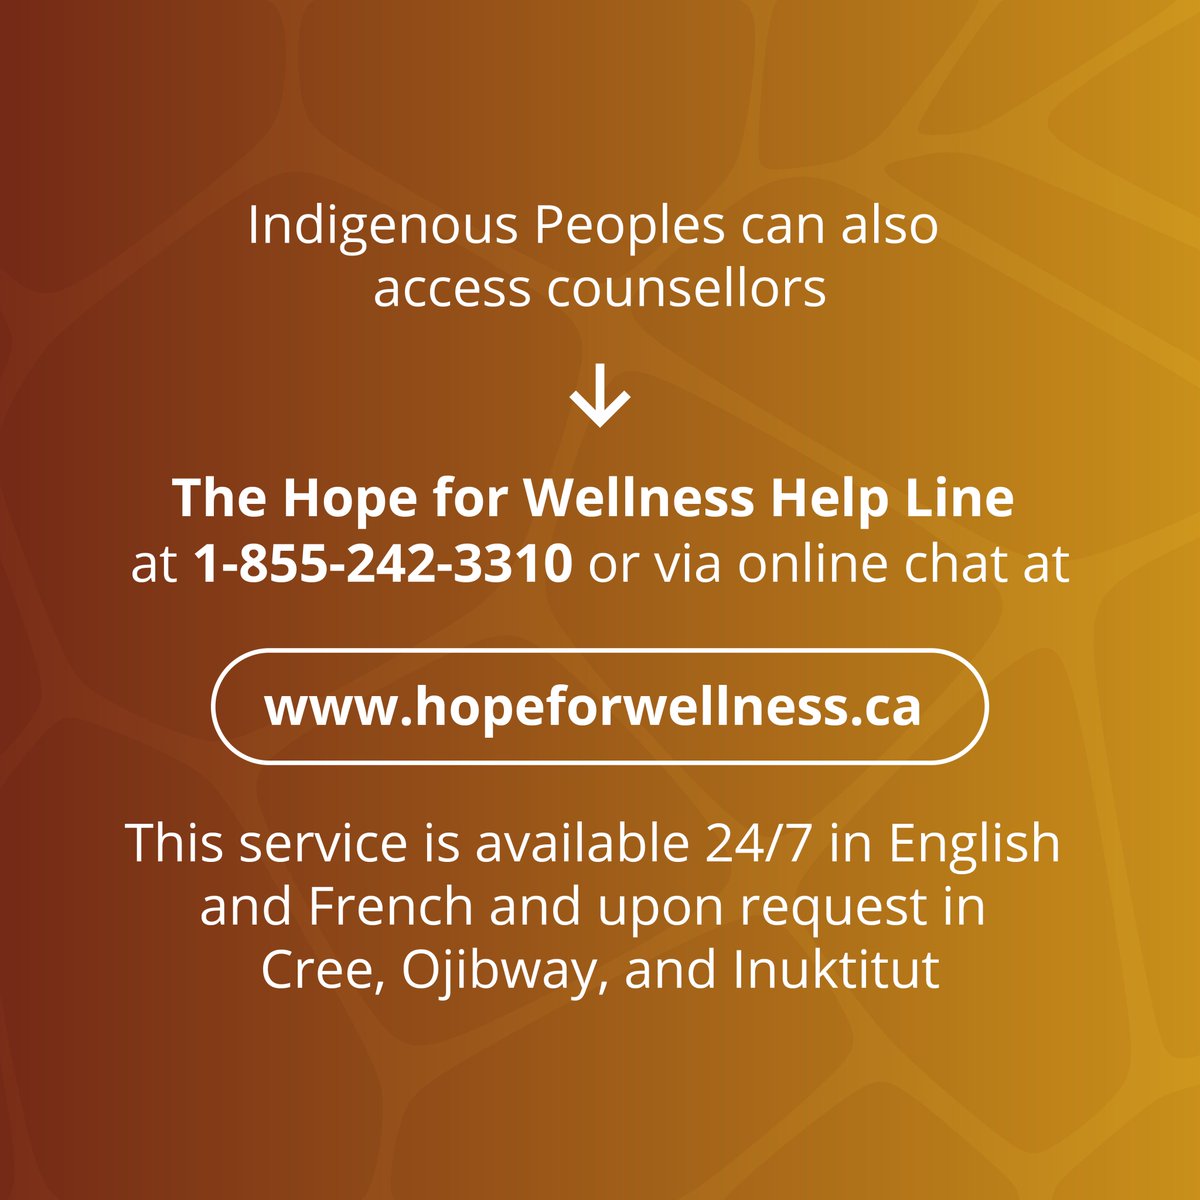 Indigenous Peoples can access The Hope for Wellness Help Line by phone at 1-855-242-3310 or via online chat at hopeforwellness.ca. This service is available 24/7 in English and French and upon request in Cree, Ojibway, and Inuktitut.